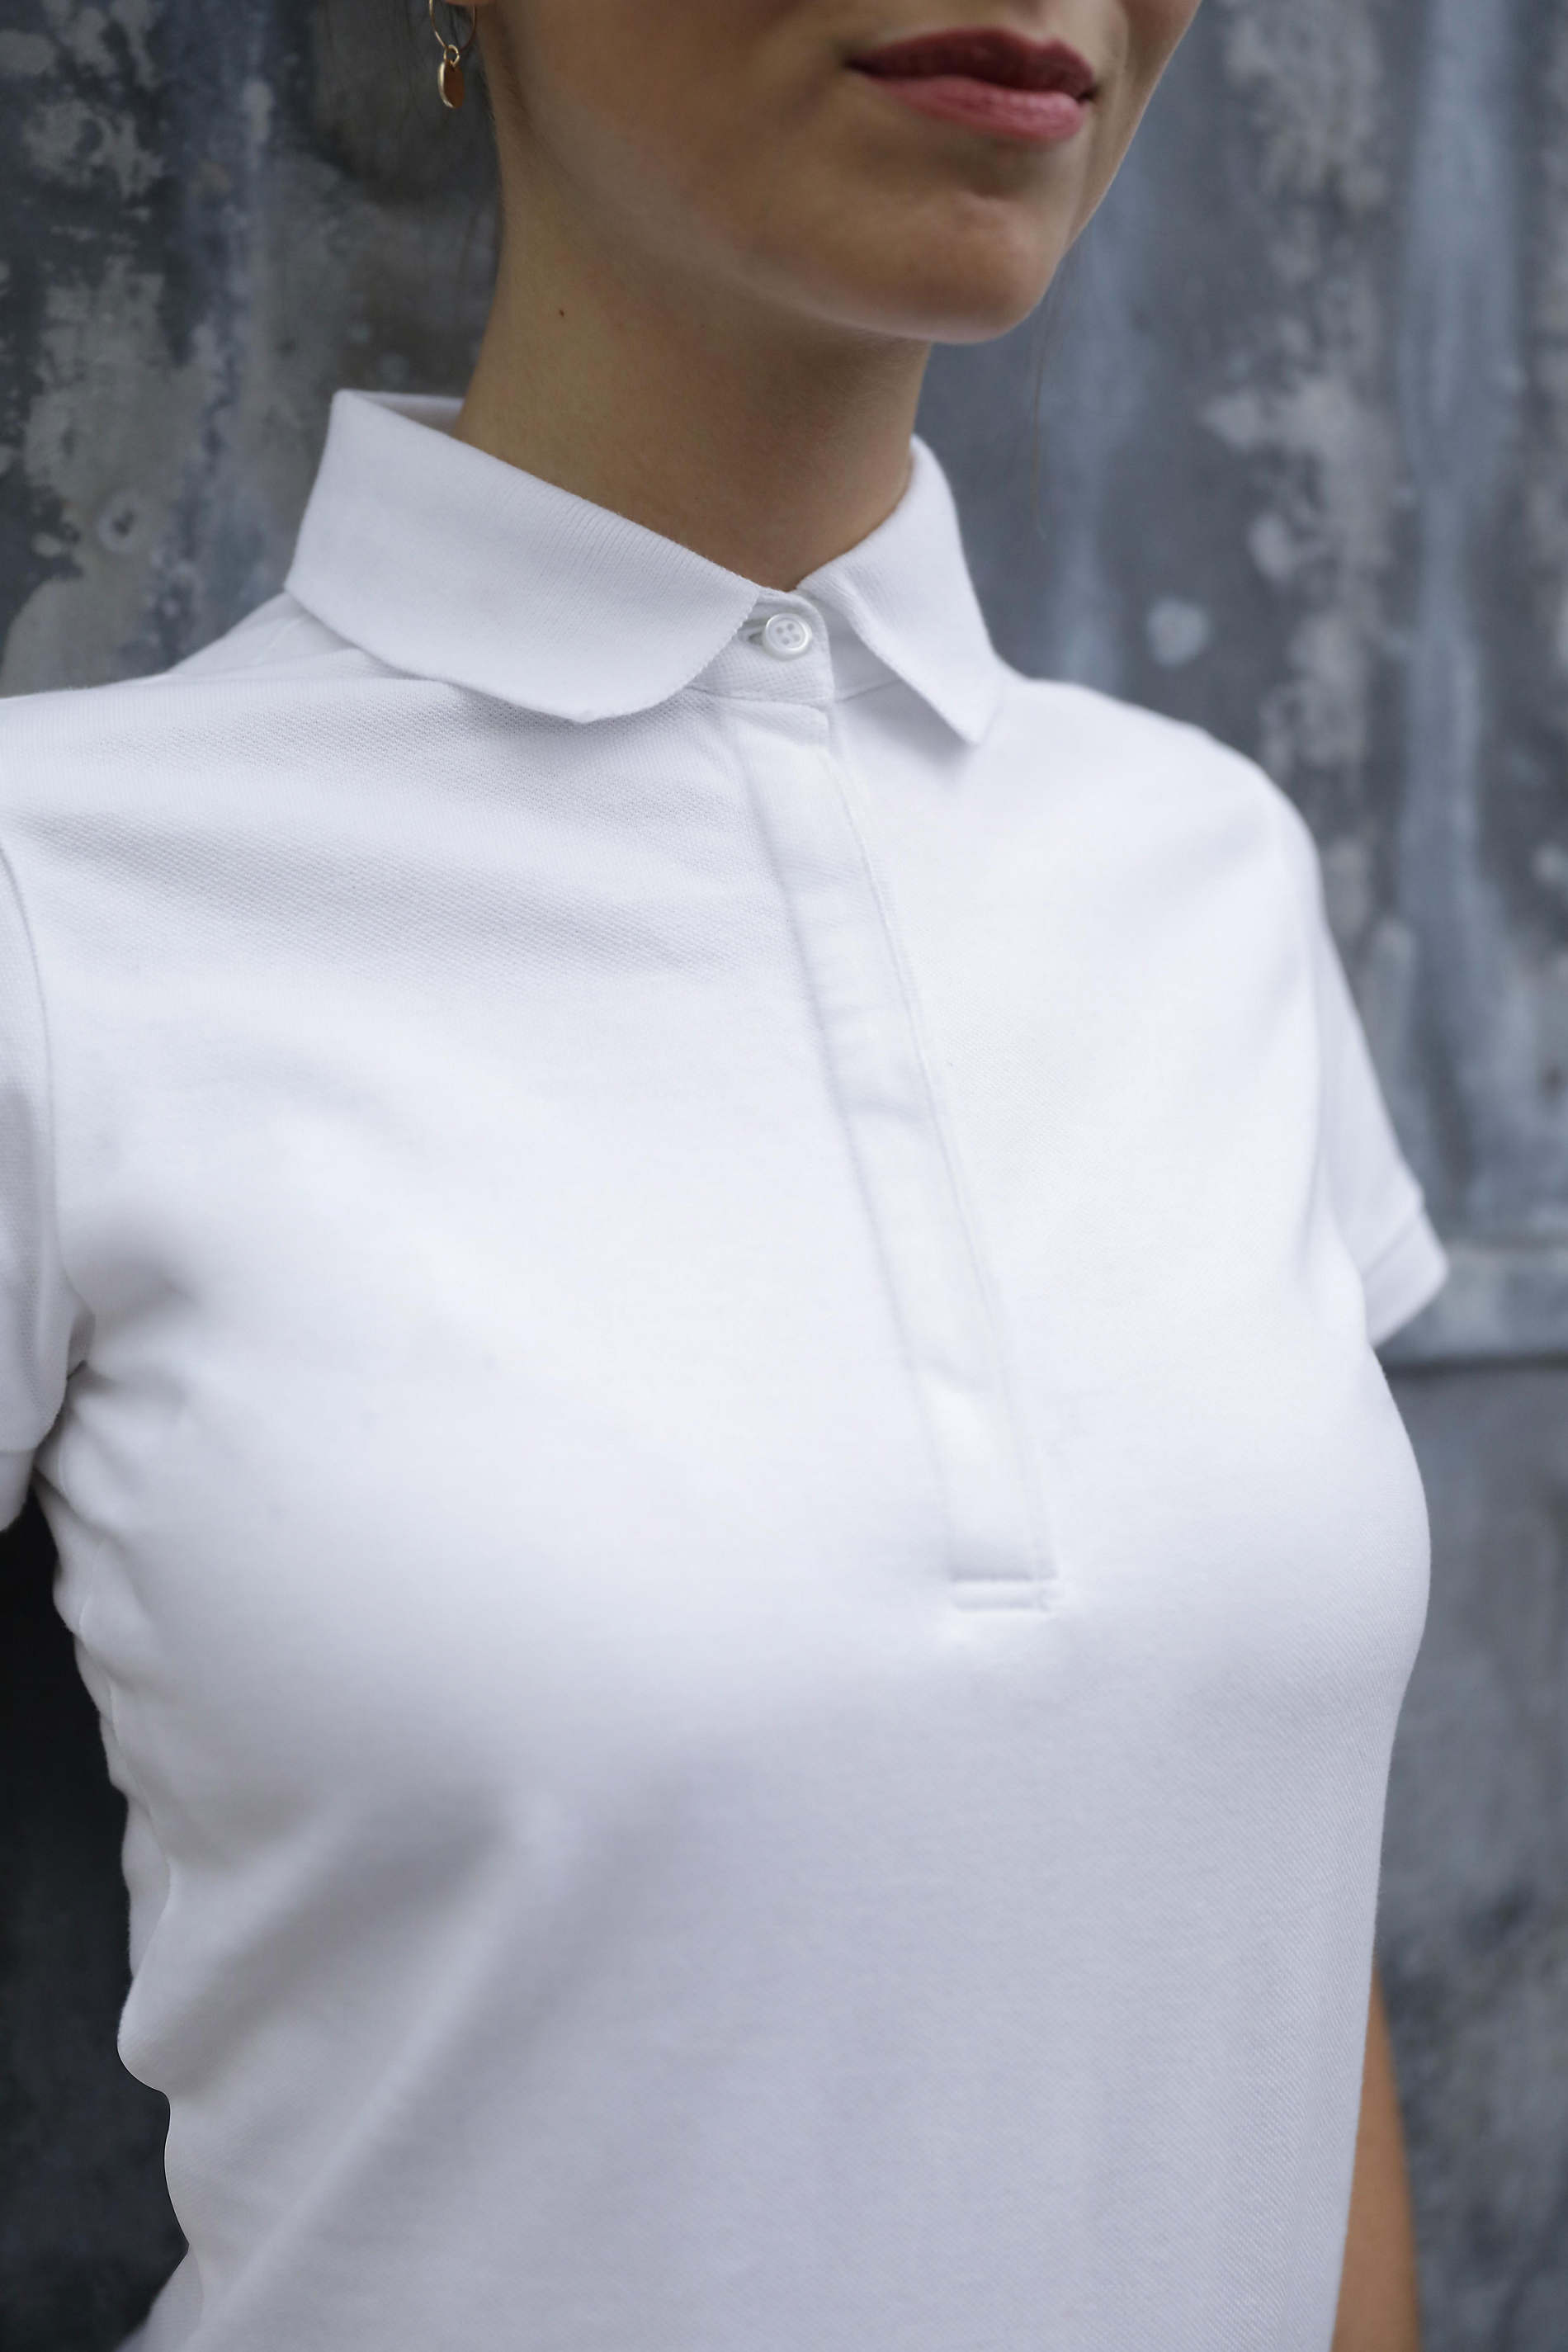 Women's piqué polo shirt with concealed placket<p>Lightweight and comfortable, this short sleeve piqué polo shirt is a simple and casual garment. With its concealed button placket, it is ideal for a casual look, while keeping its smart style.<p> NEOBLU OWEN WOMEN